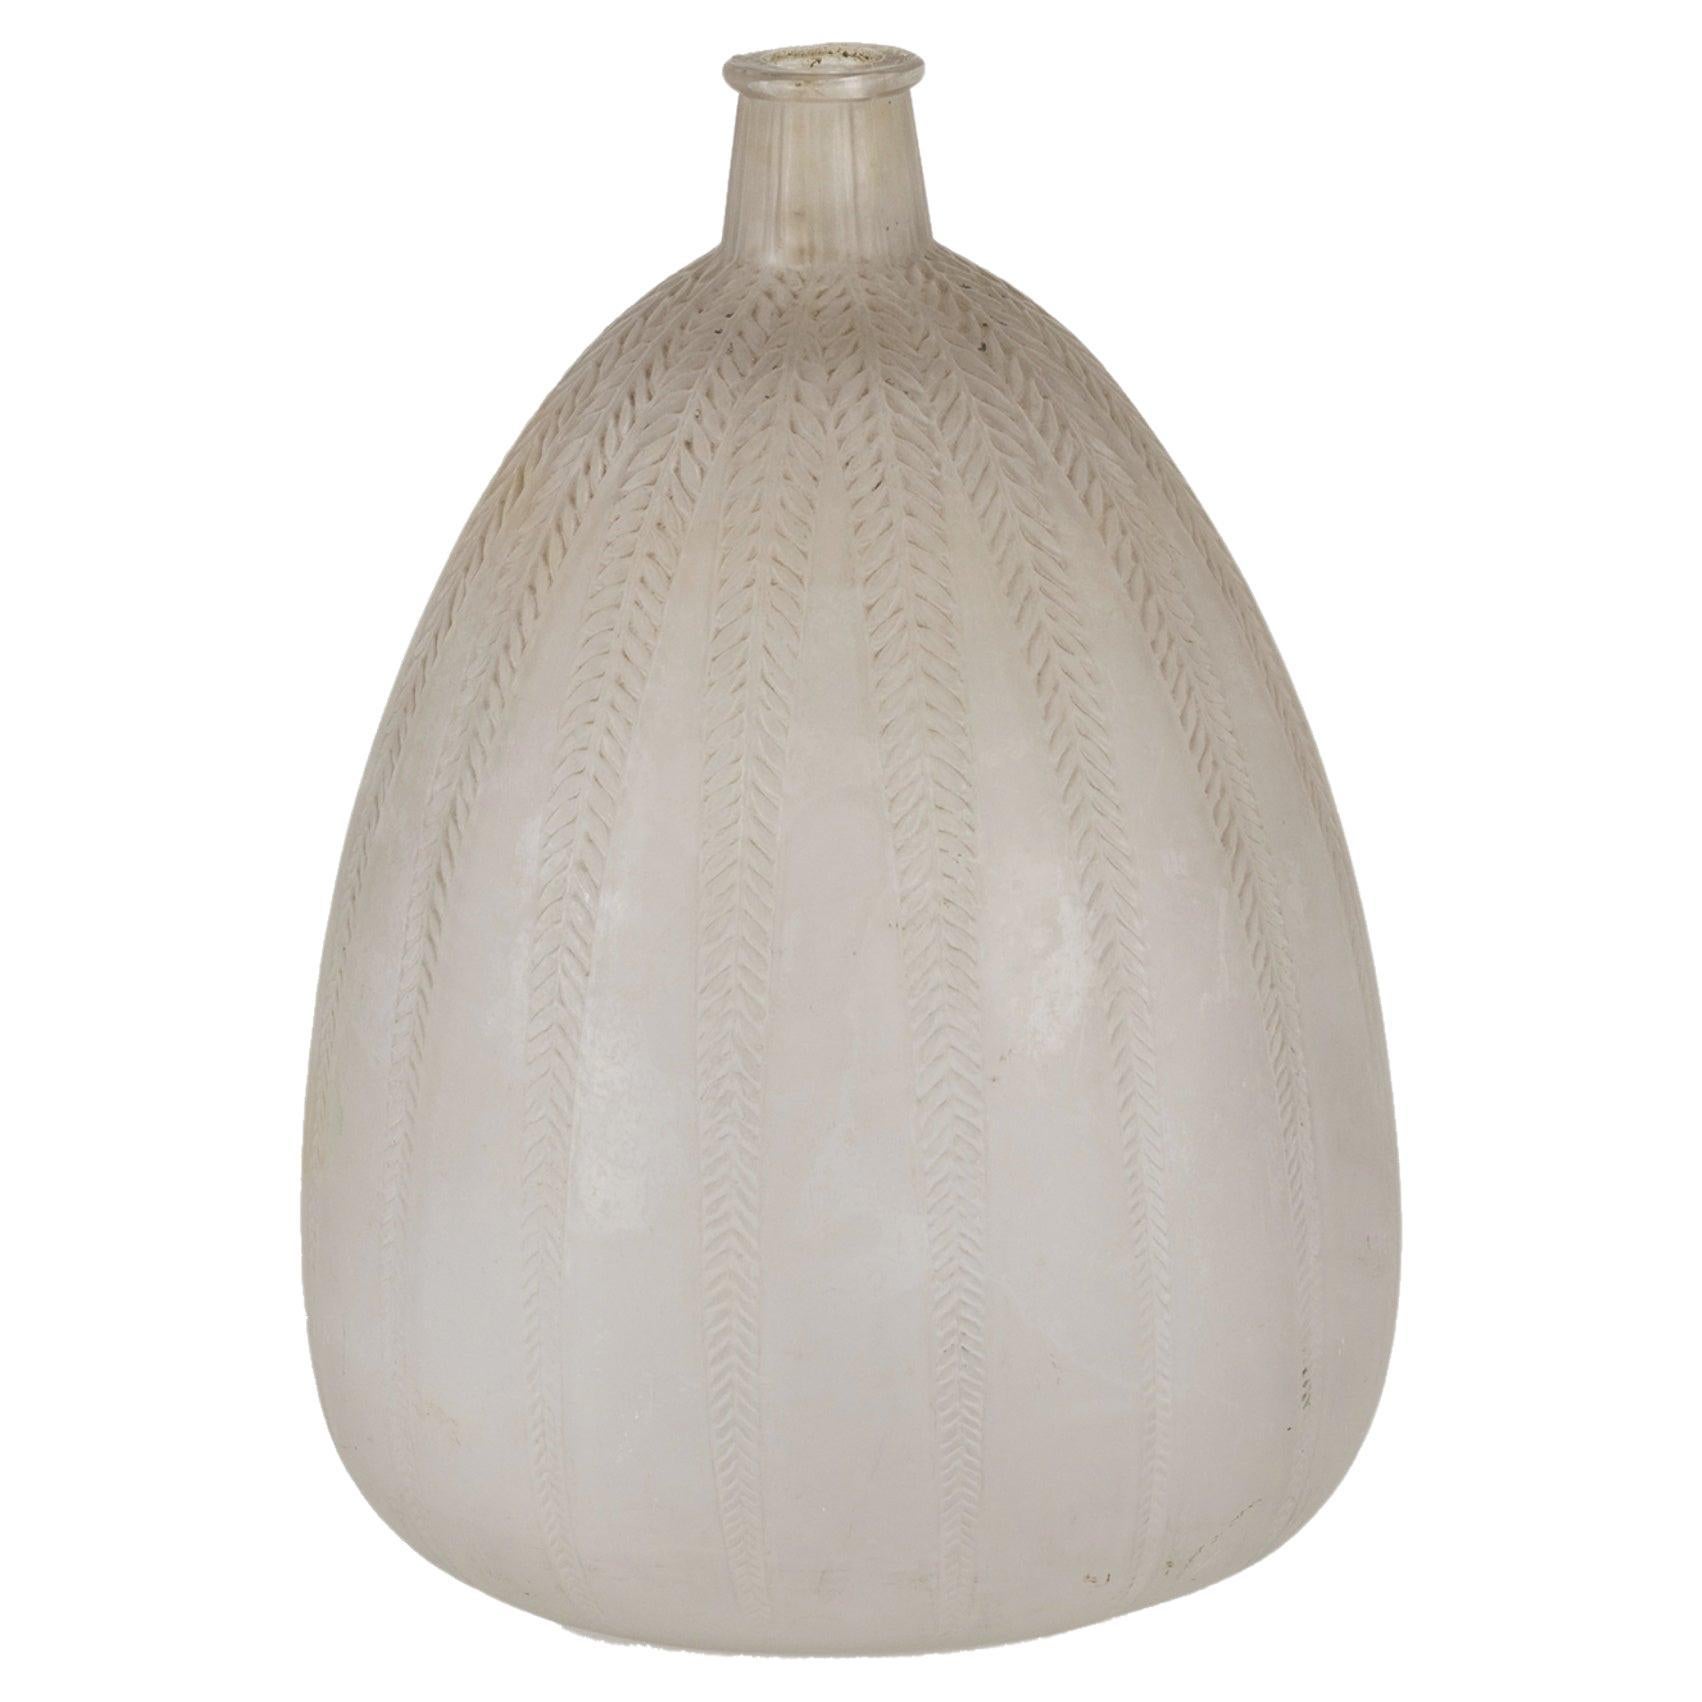 Mimosa Vase by Rene Lalique in Opalescent Glass, 1921